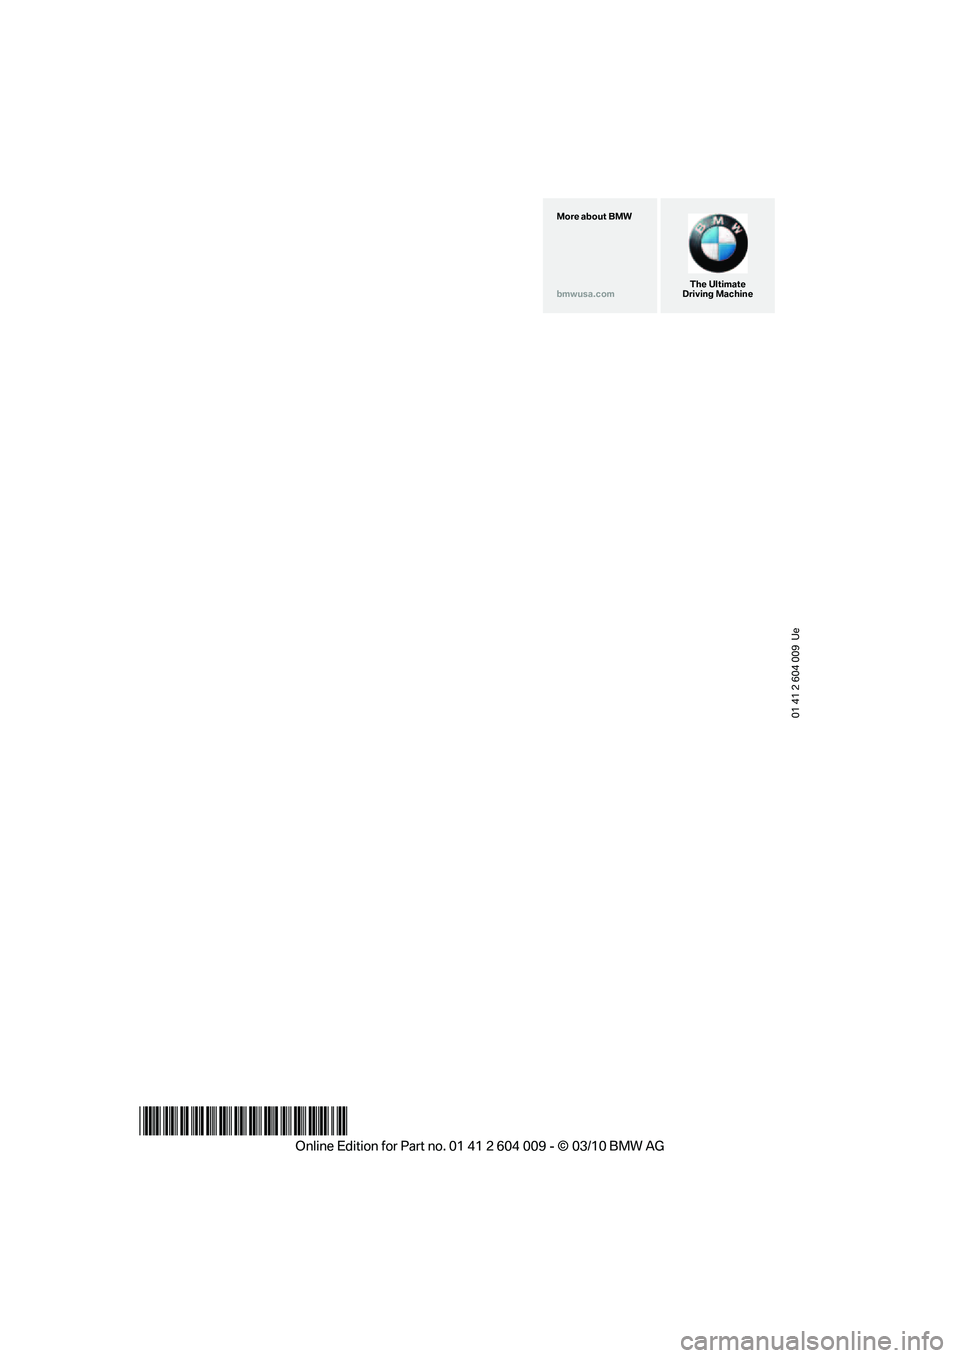 BMW ACTIVEHYBRID X6 2011  Owners Manual 01 41 2 604 009  Ue
*BL260400900P*
The Ultimate
Driving Machine More about BMW
bmwusa.com 